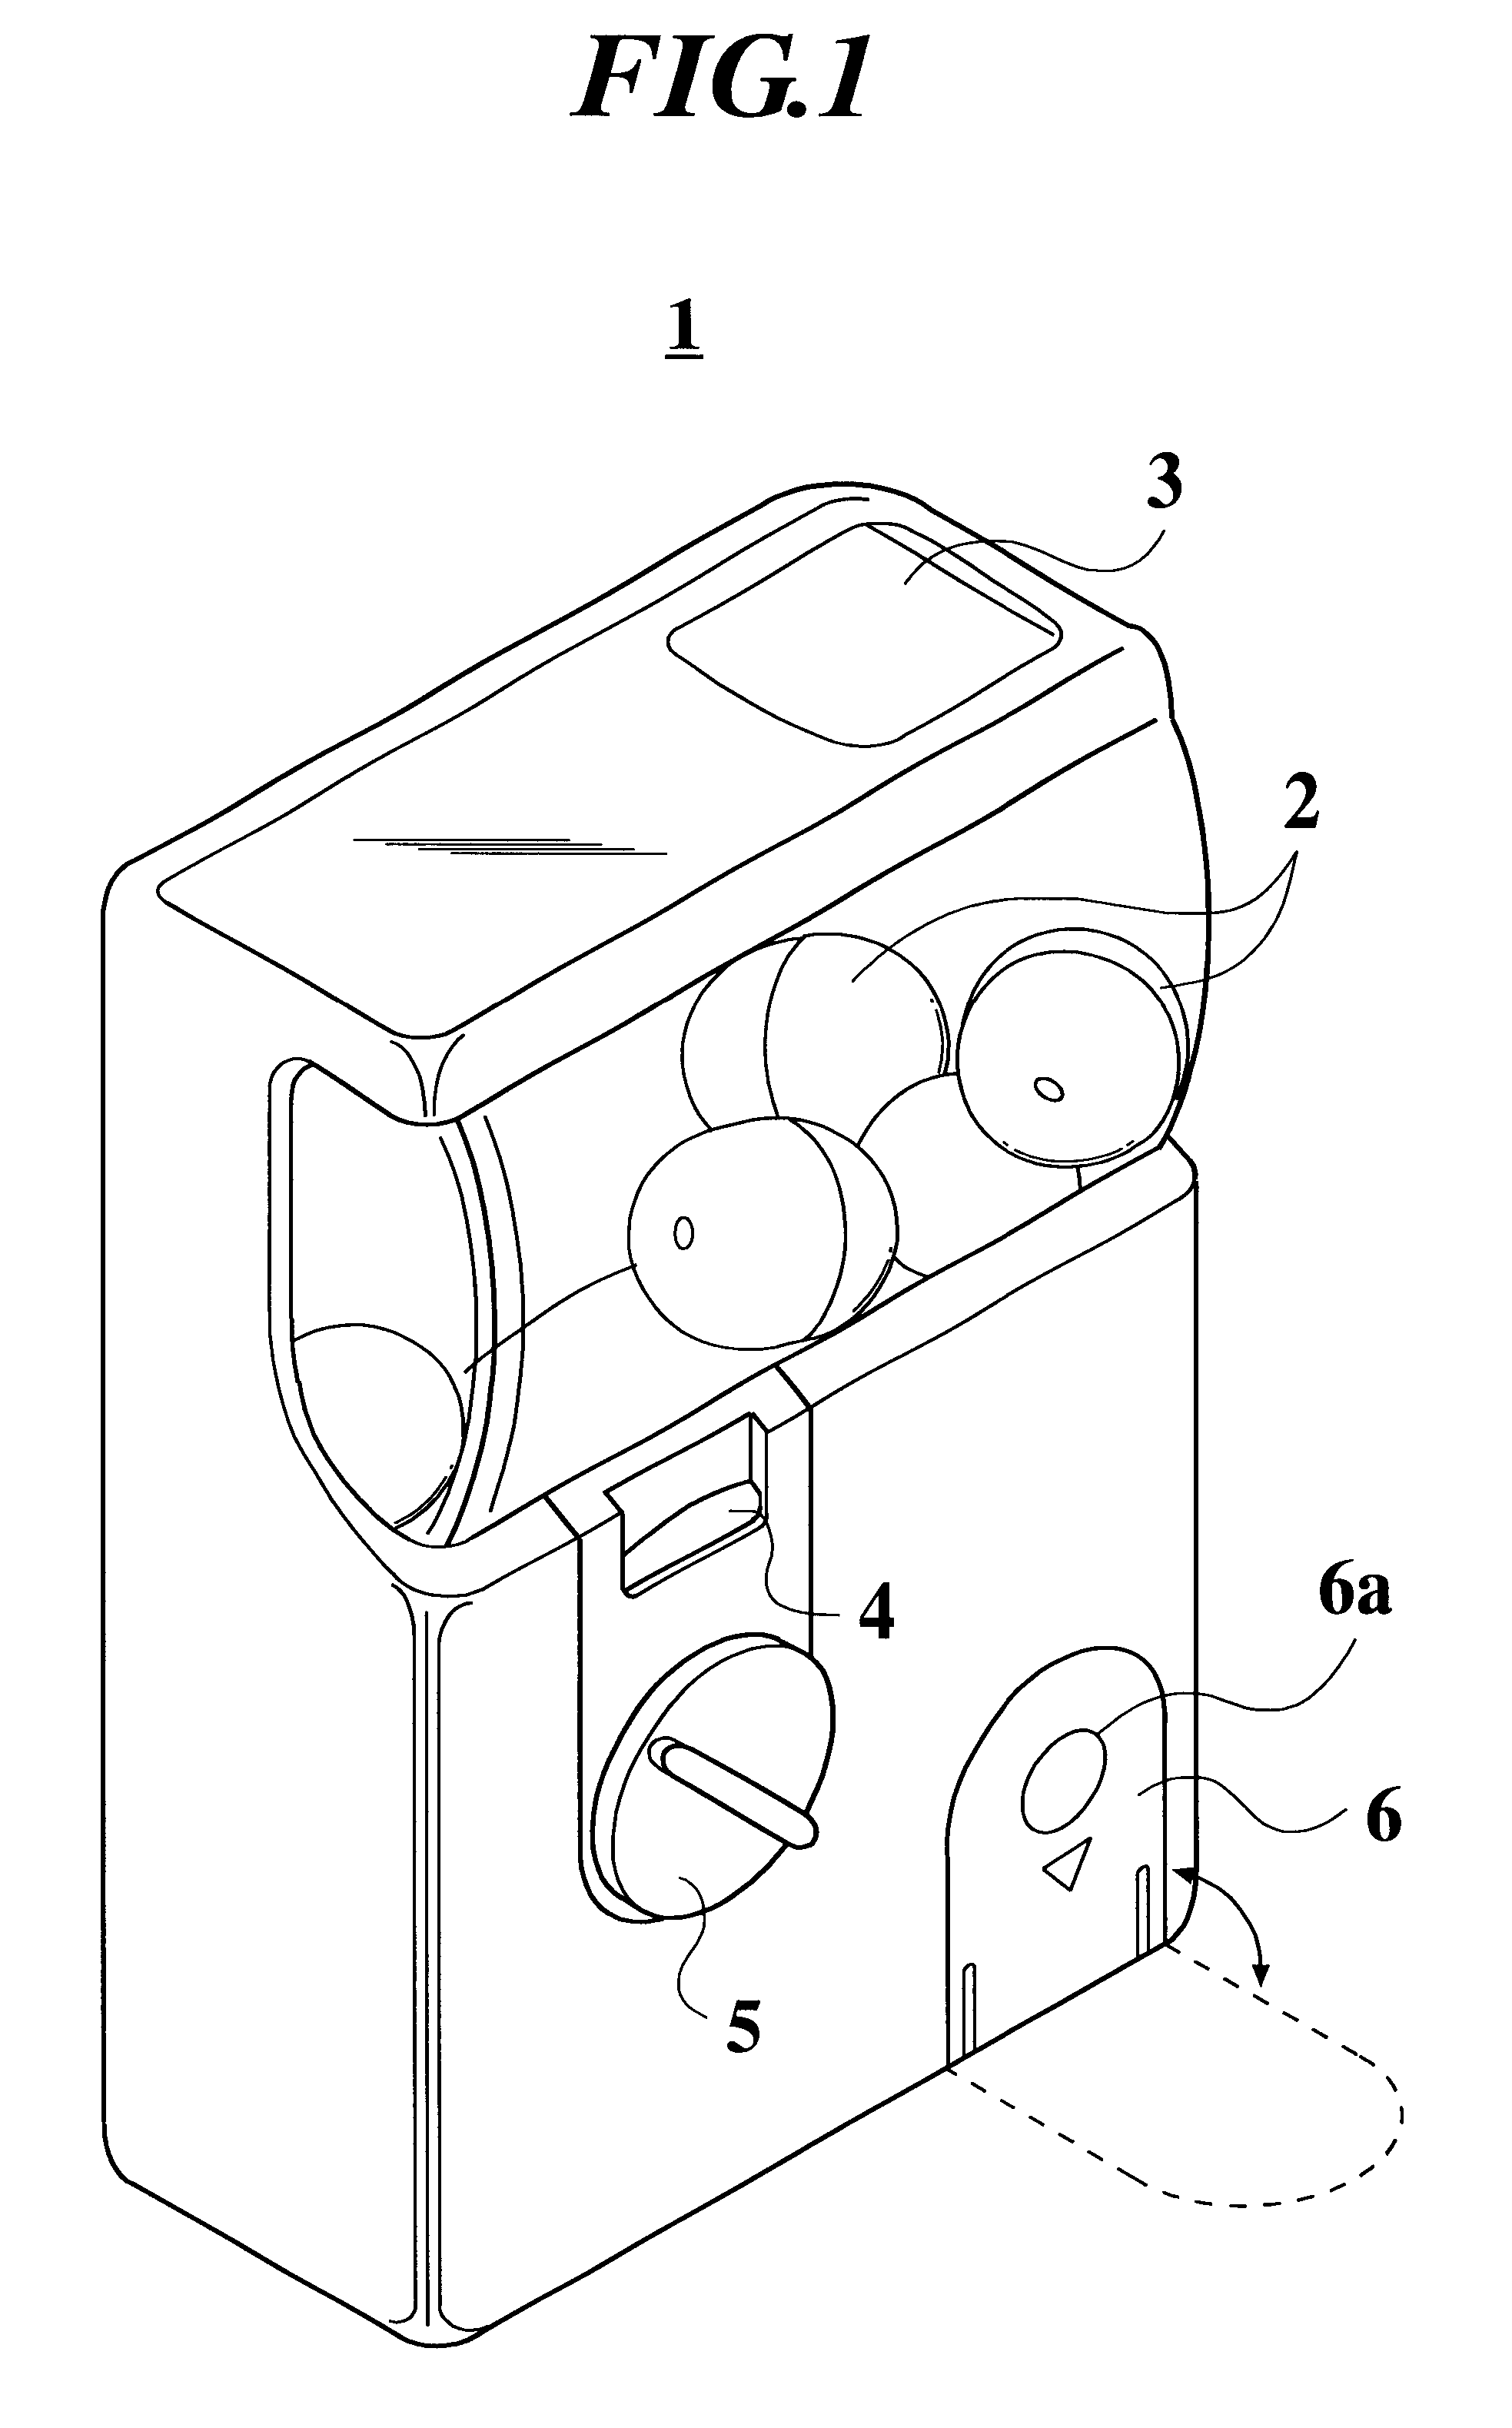 Coin sorting device, commodity discharging device, and game device